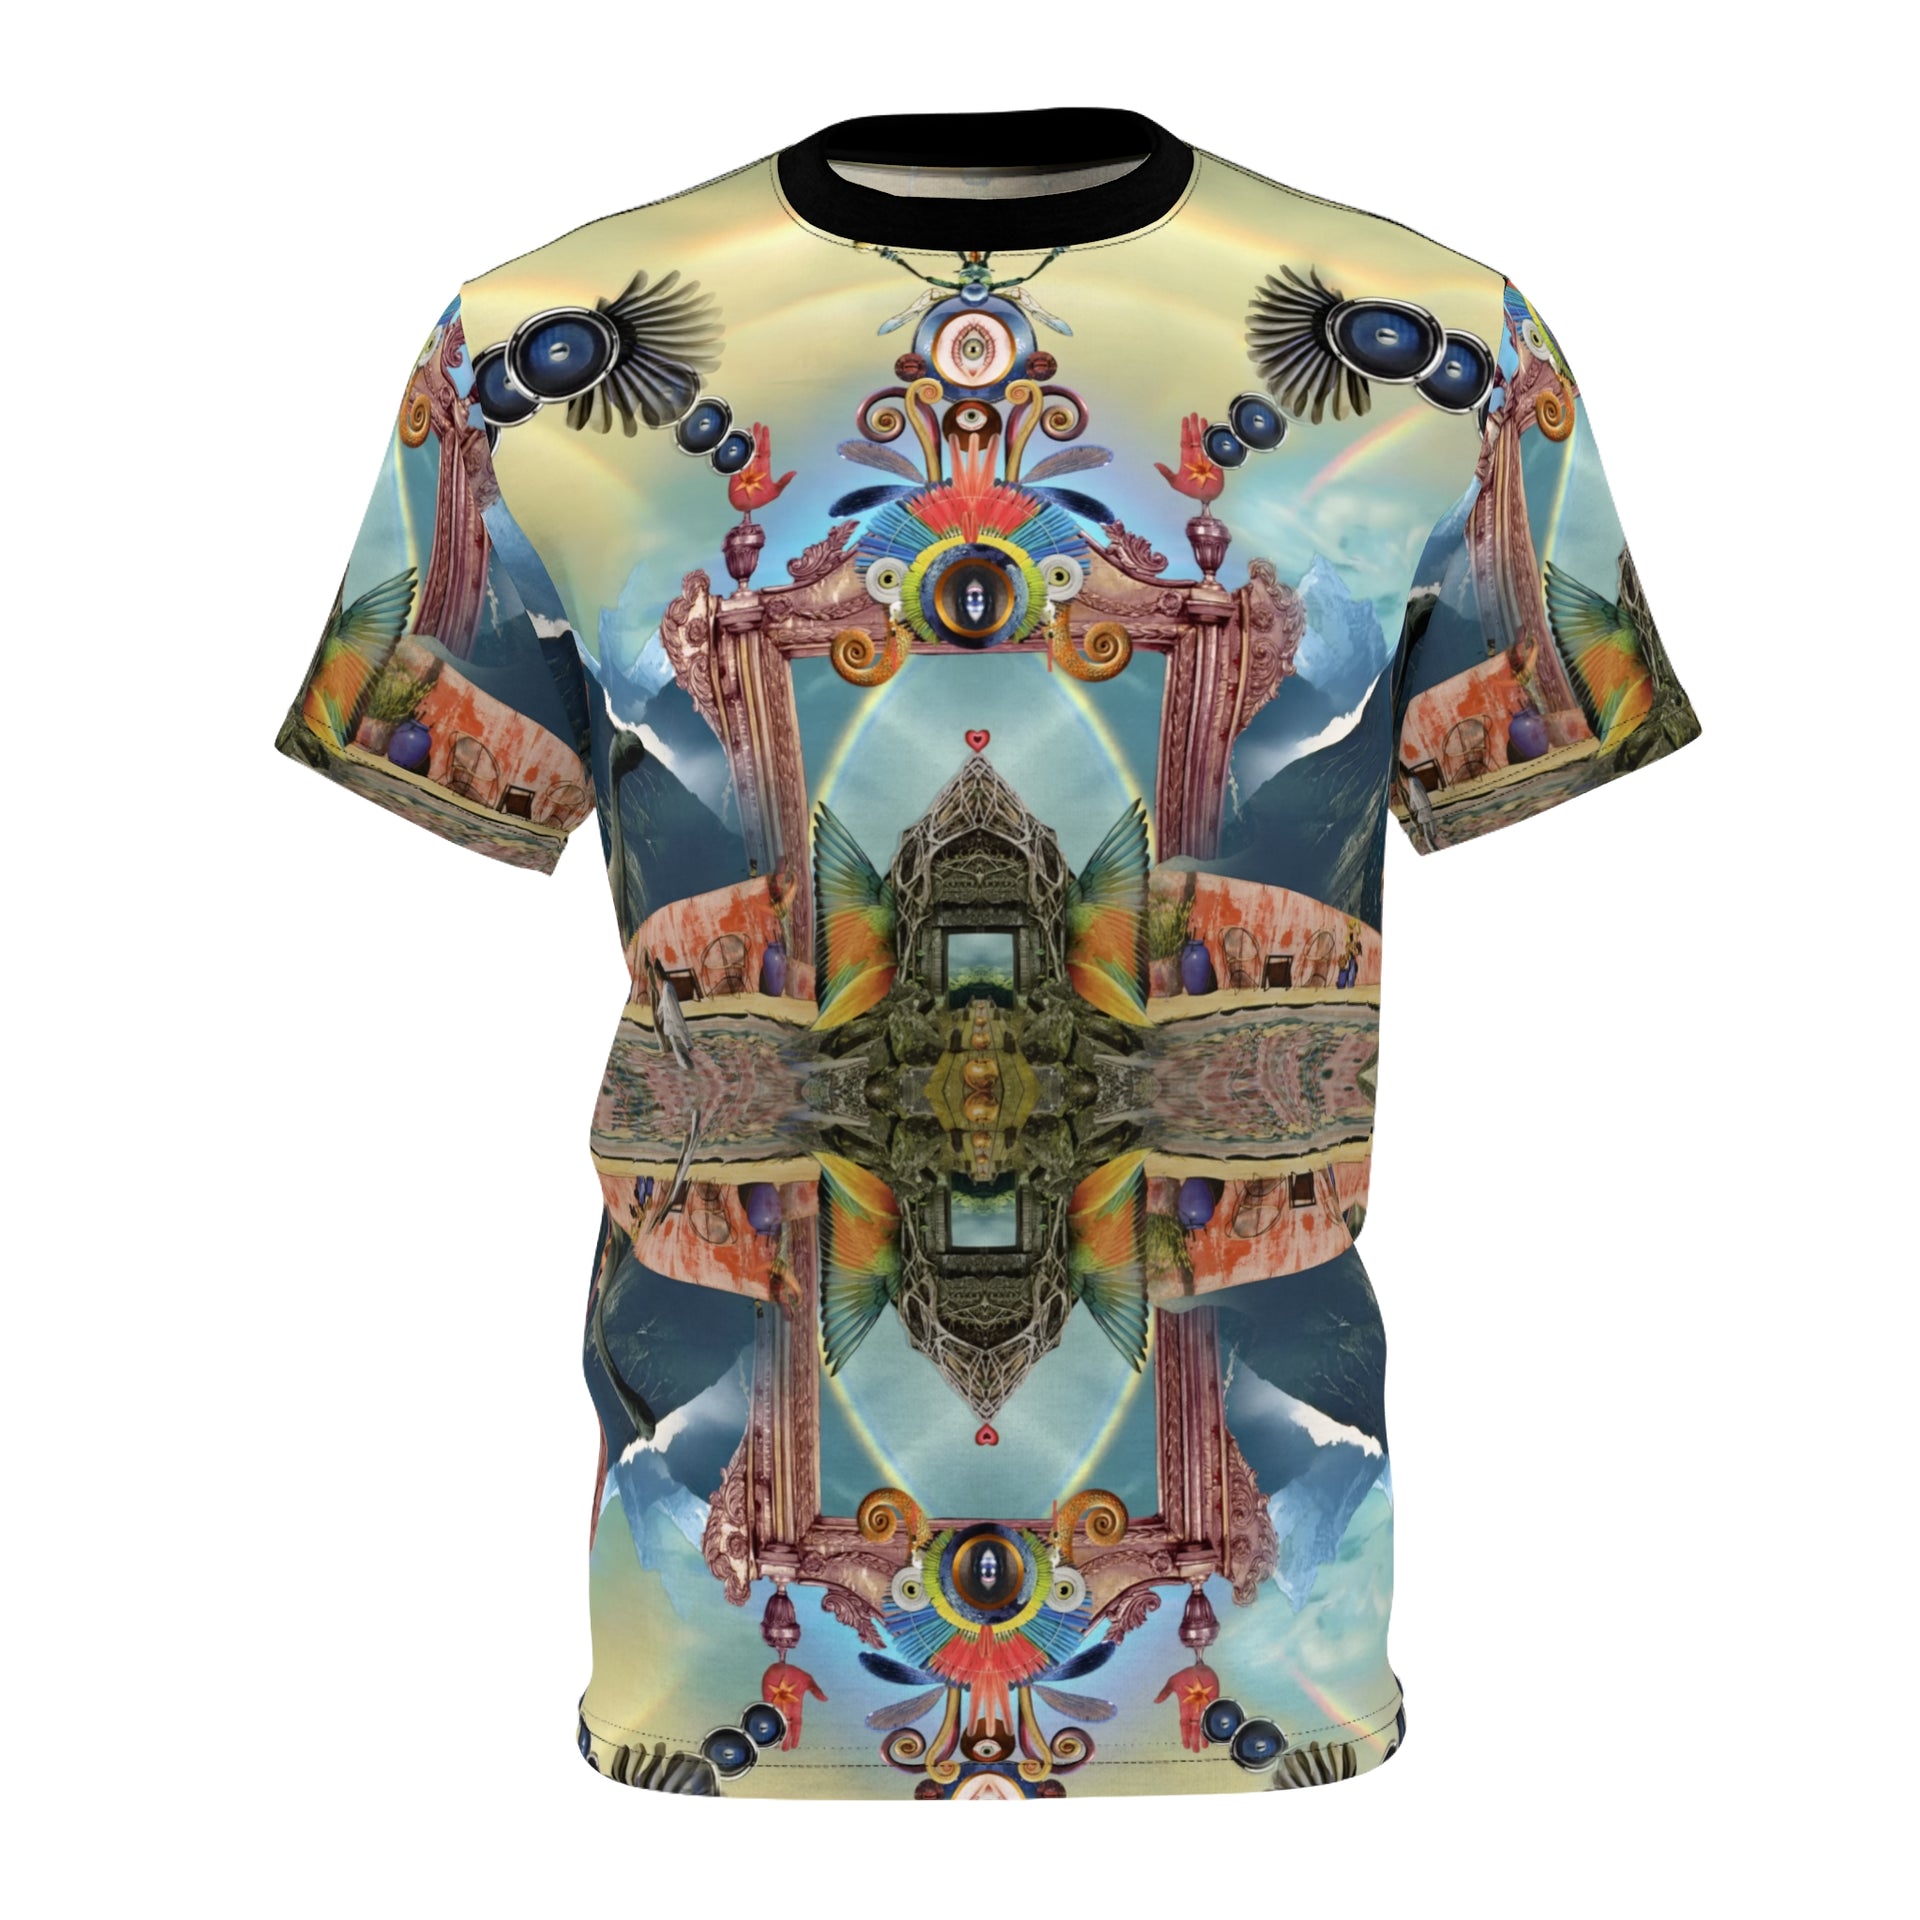 Bassnectar - Other Worlds A] - All over print tee